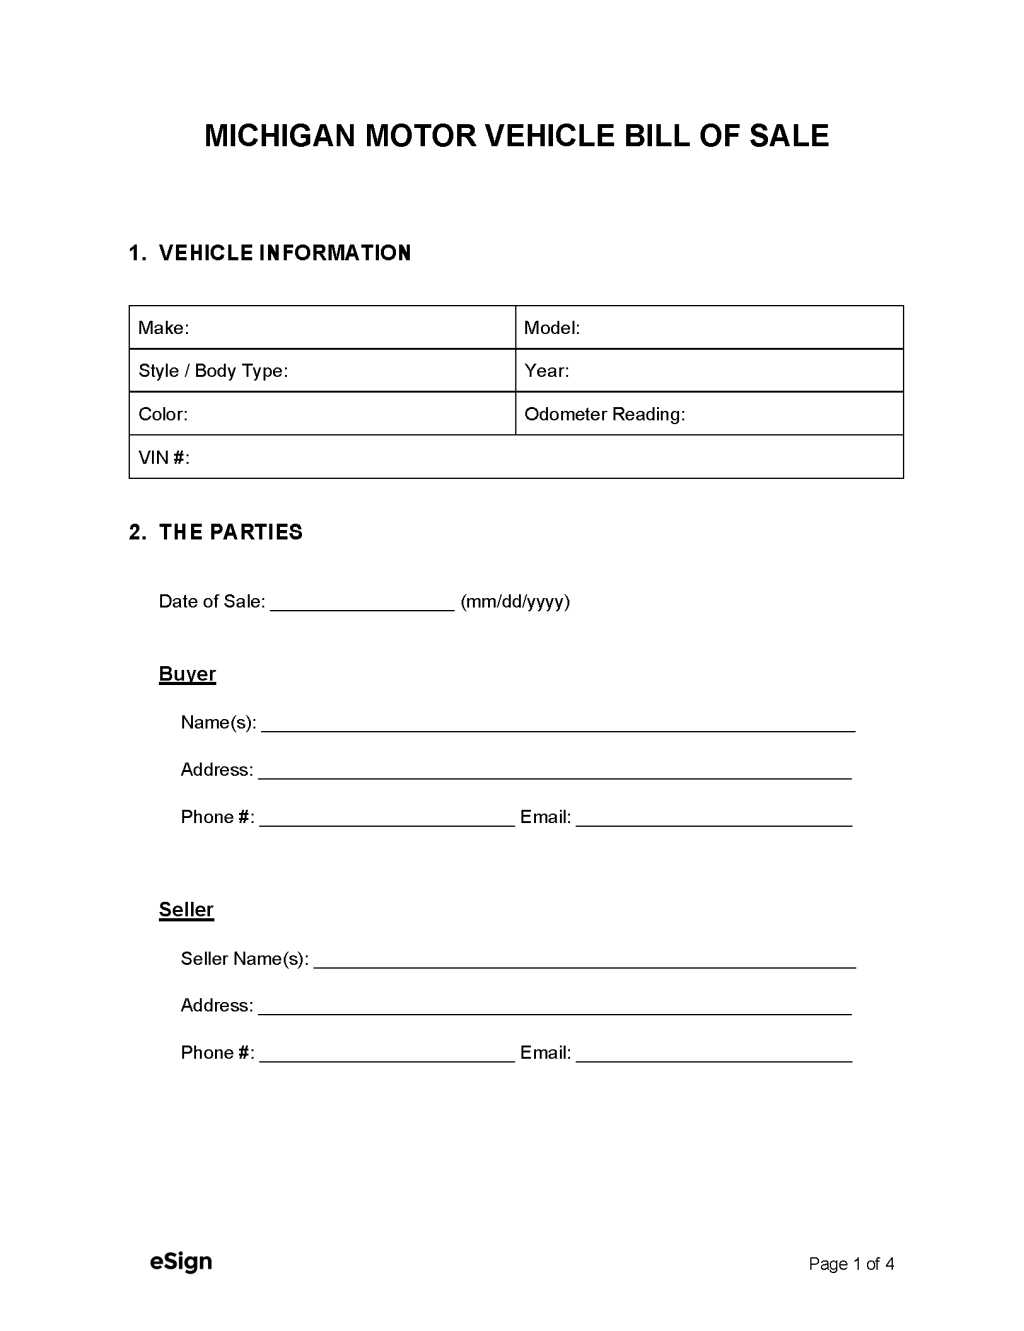 Picture of: Free Michigan Motor Vehicle Bill of Sale Form  PDF  Word